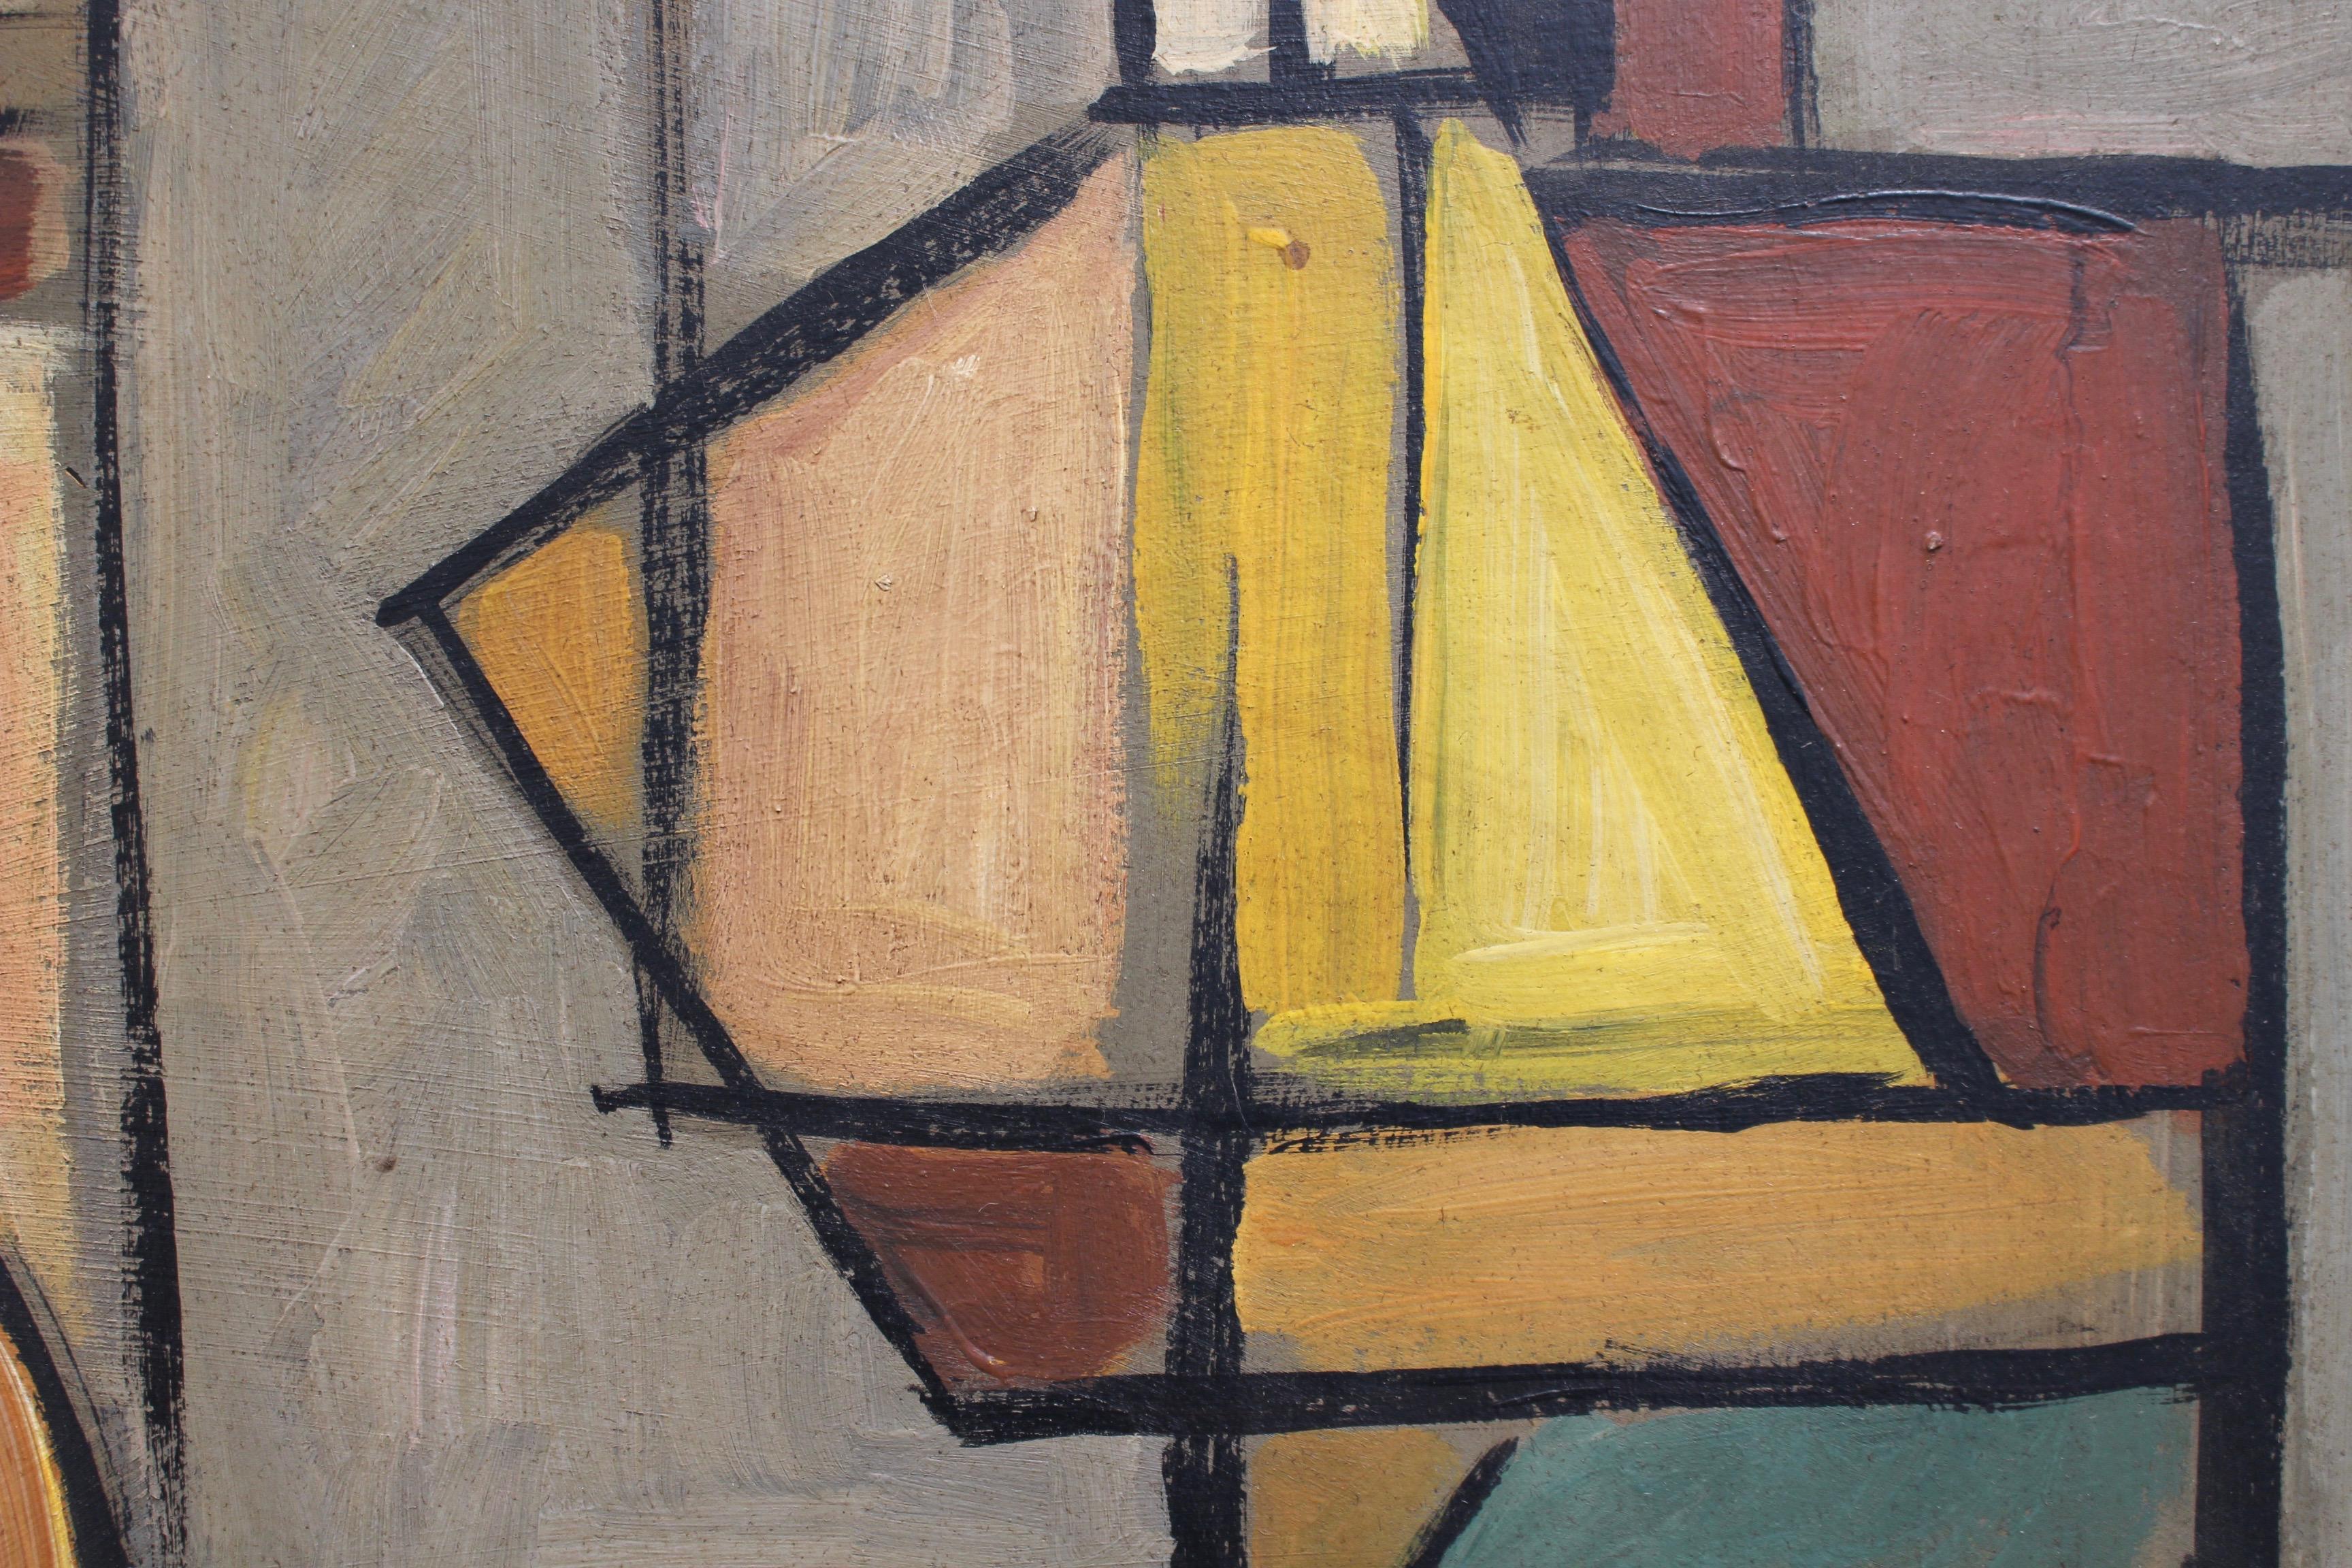 'Cubist Man and Woman', oil on board, by STM (circa 1950s - 1970s). A considerable work of art depicting a Picasso-inspired cubist couple which explodes with colour. Cubism created a new dimension to painting which abandoned traditional Renaissance